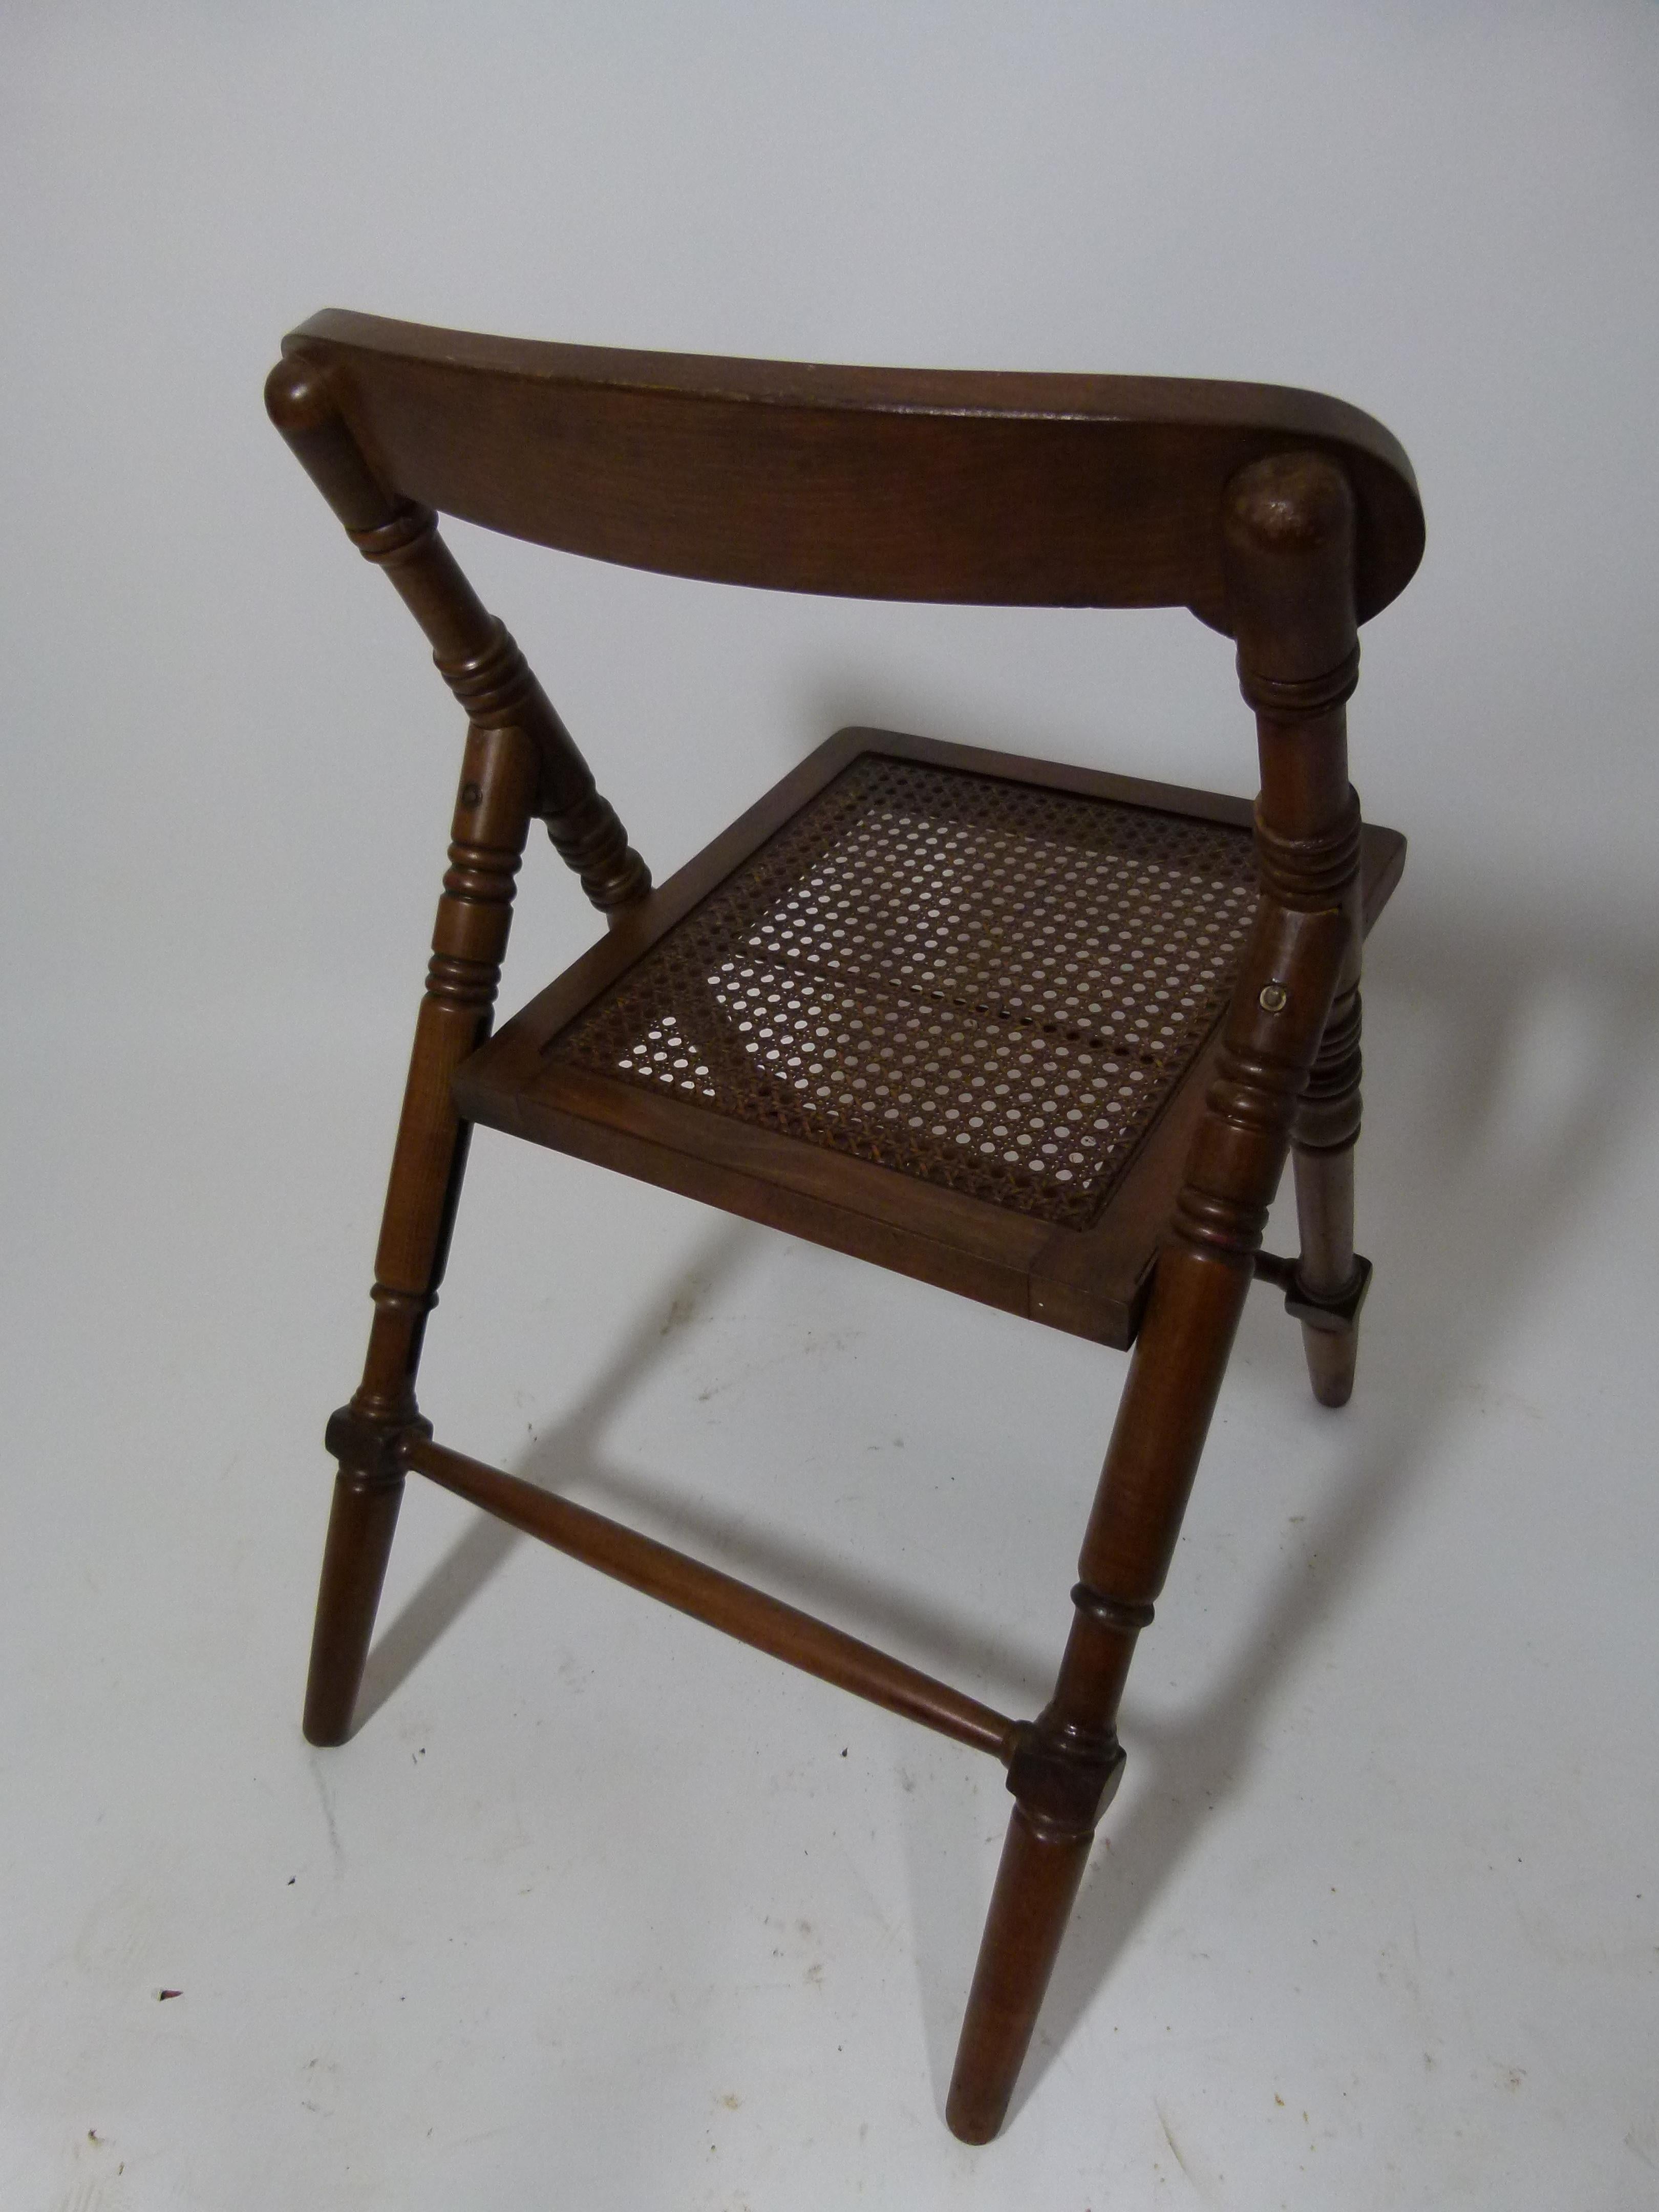 Burnished 20th Century Gridded Seat Spanish Folding Chair